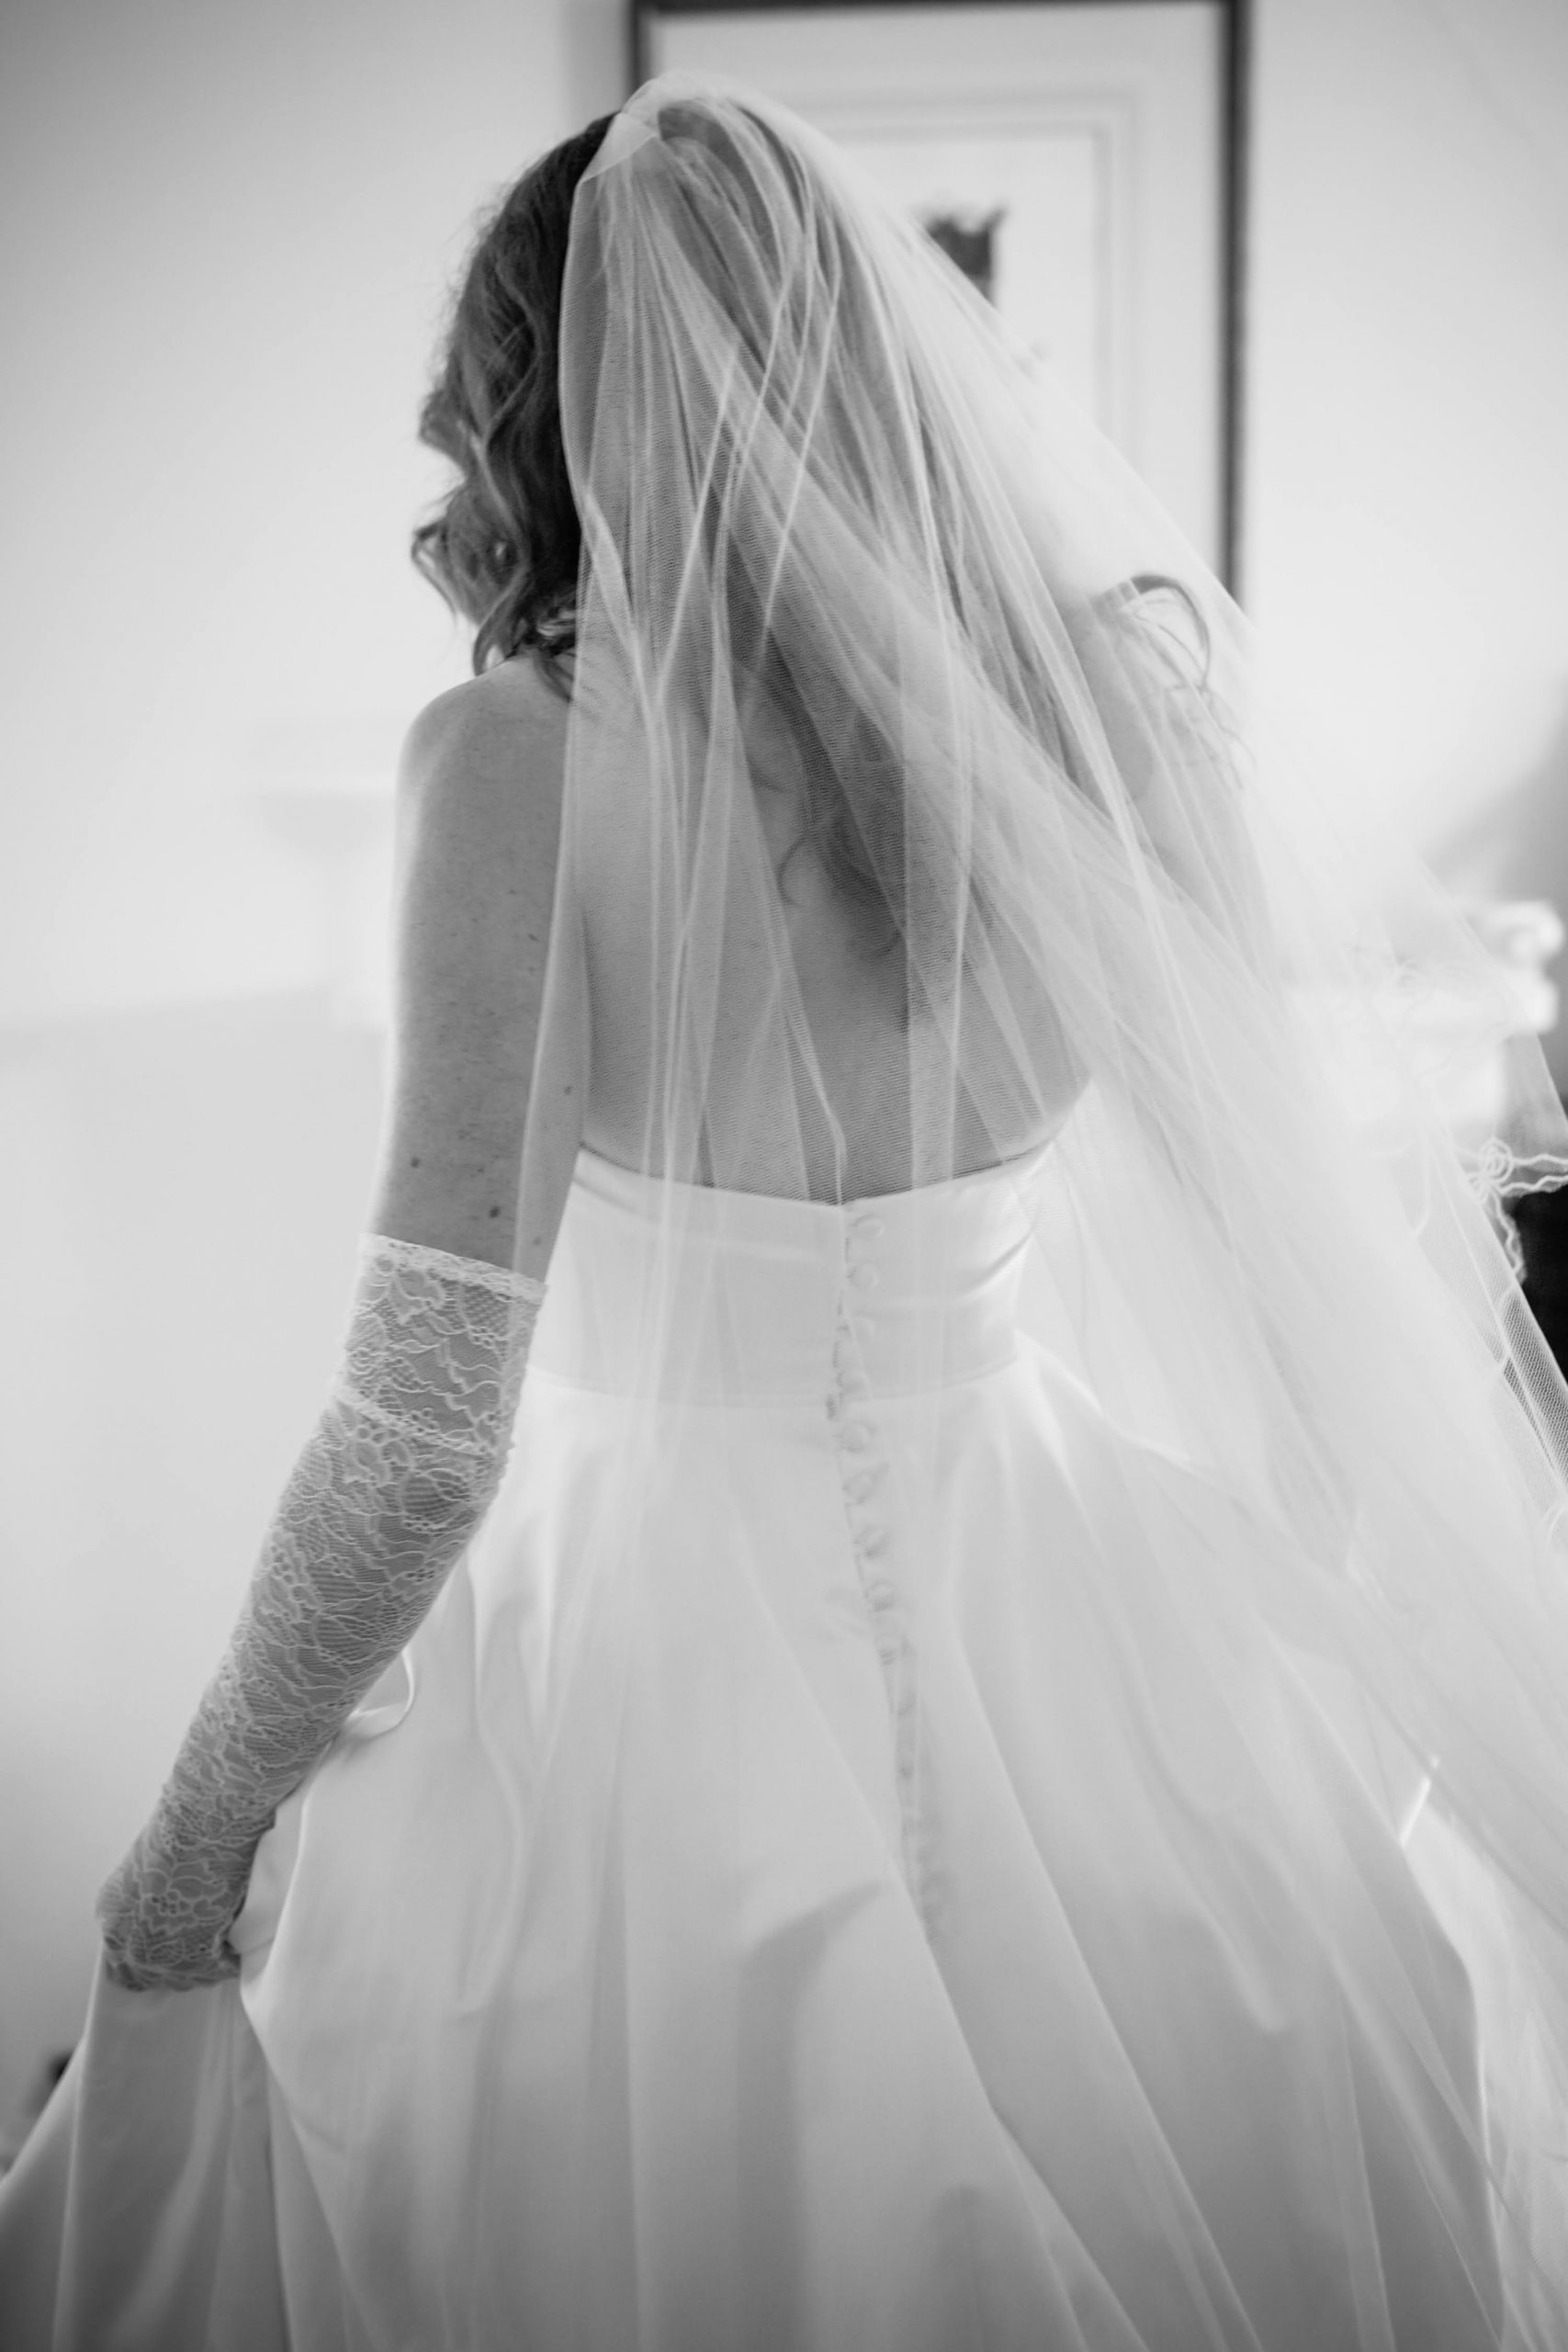 Bride with back to camera. She wears a veil and gloves. Photo is B&W